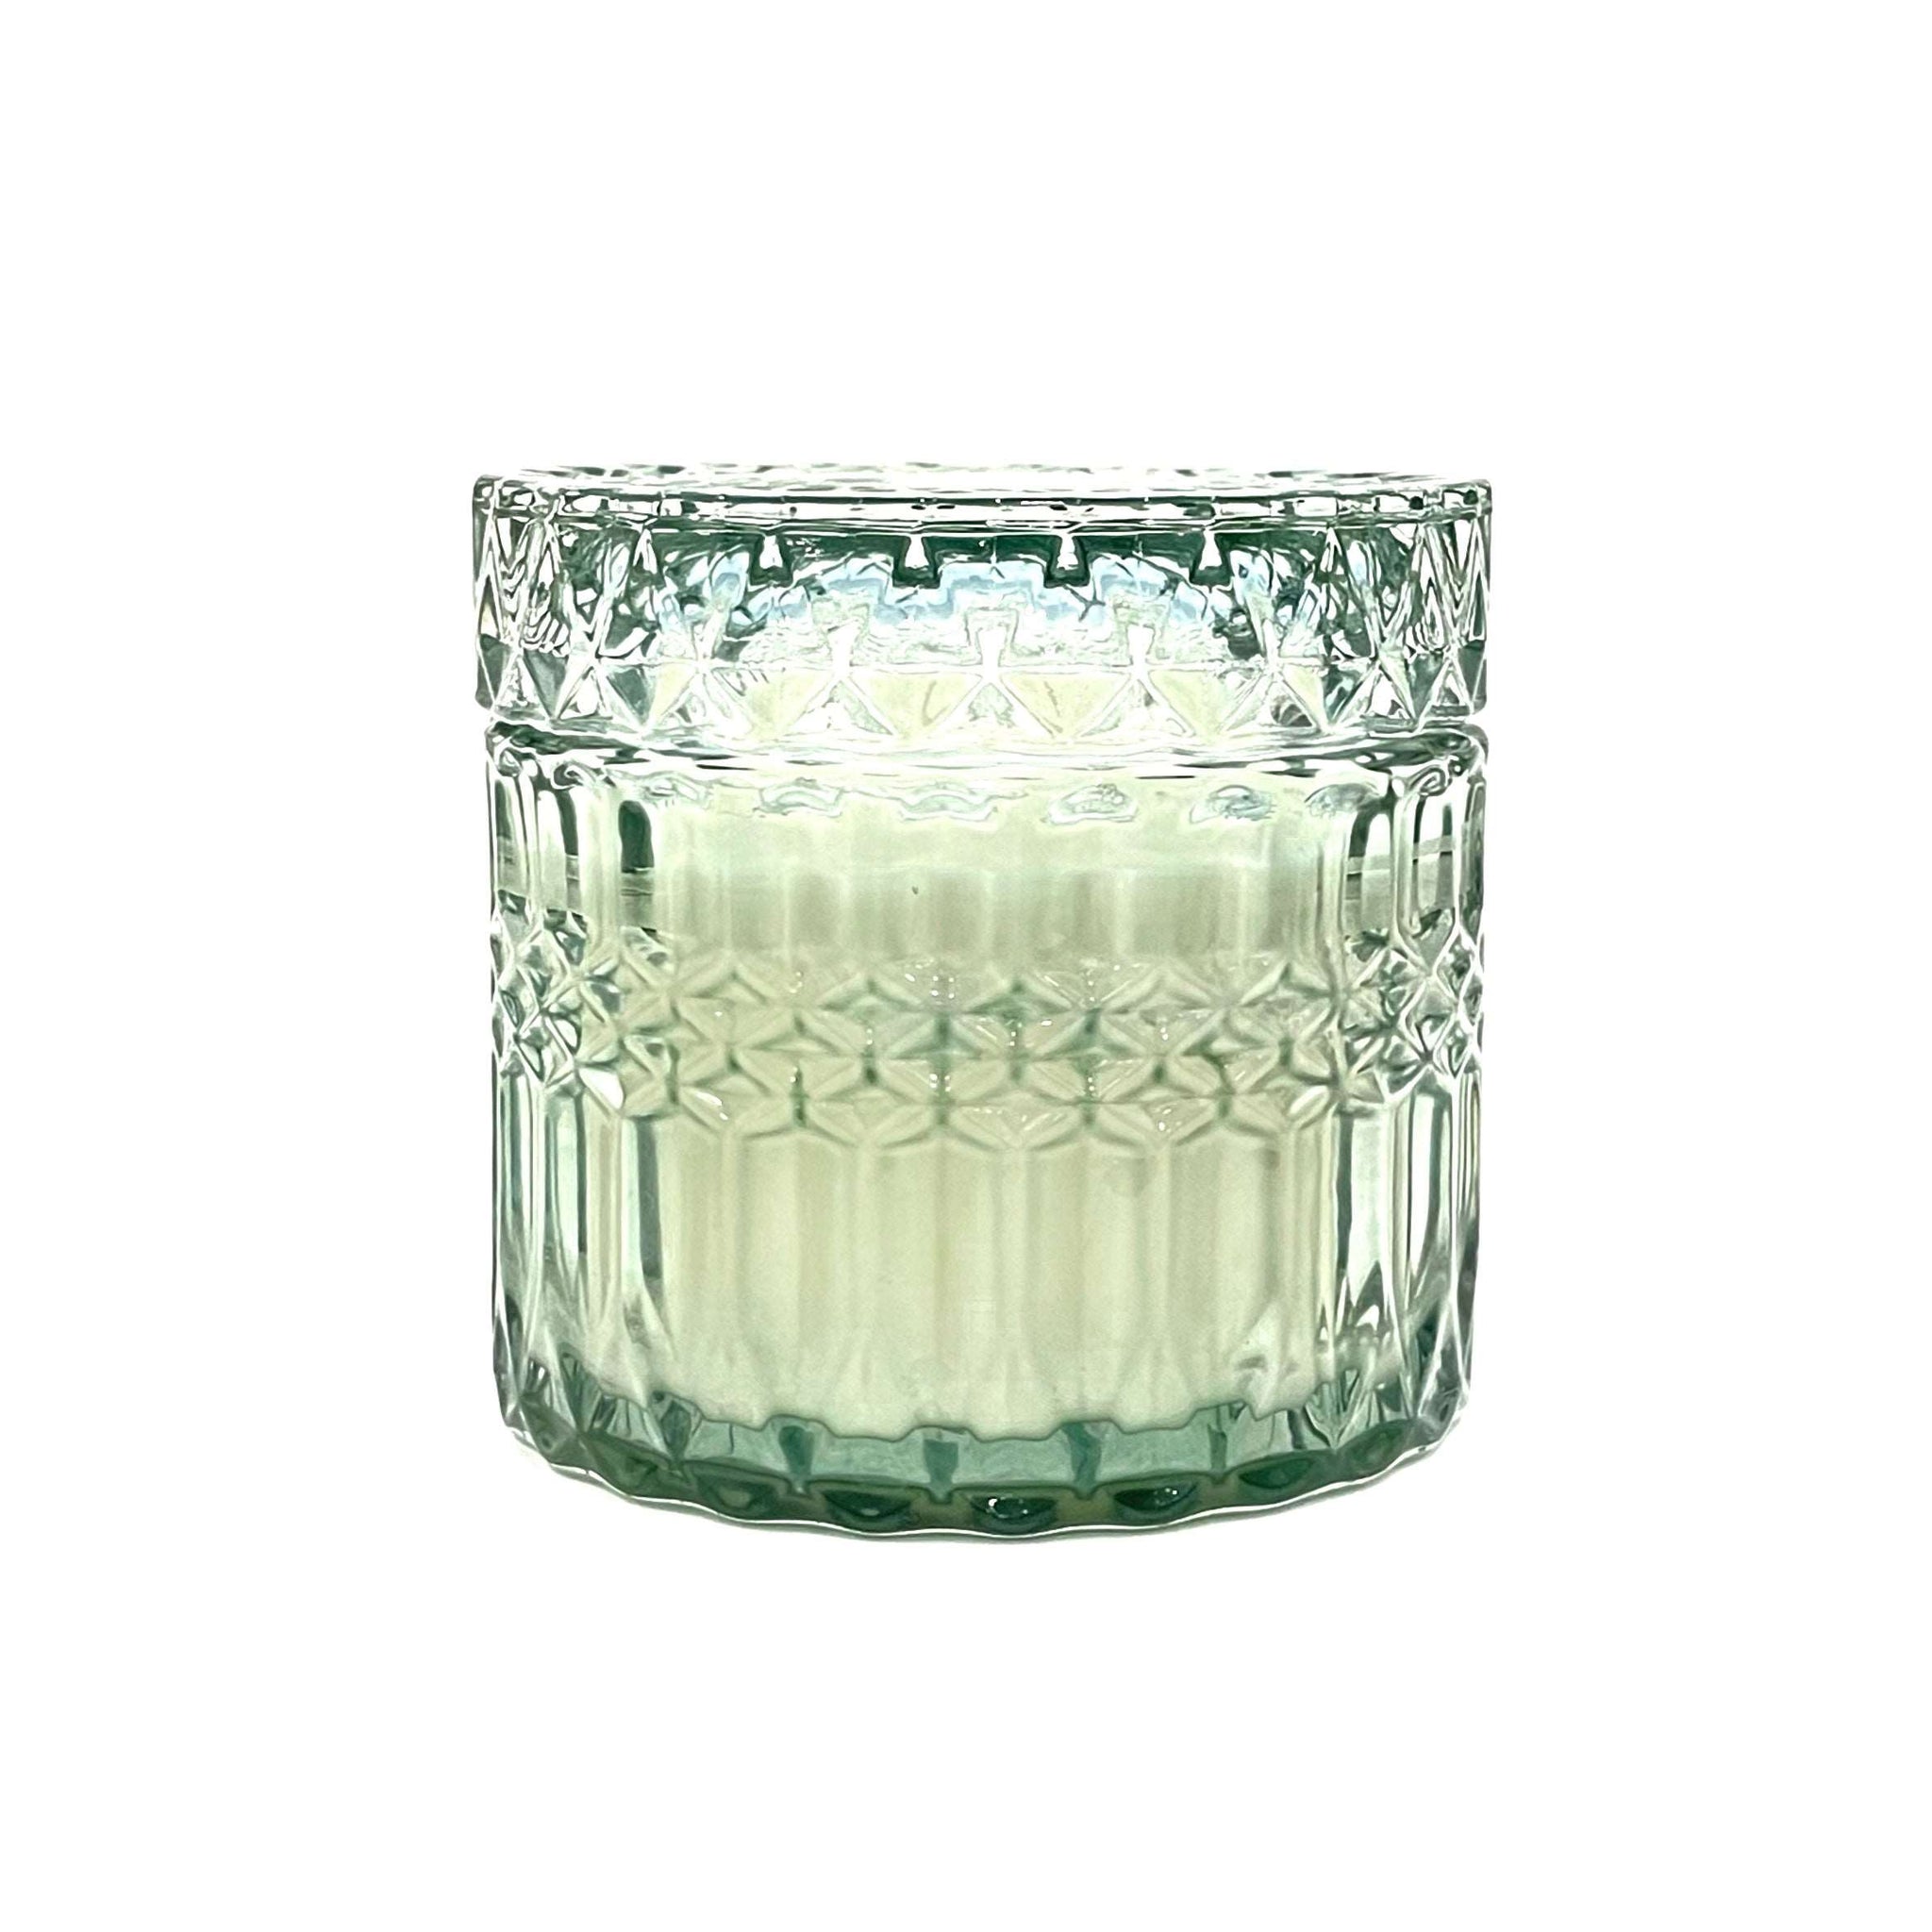 Imagine a fresh summertime herb garden.  This scent embodies the aroma of cool, crisp notes of fresh picked mint leaves mixed with ripe cucumbers plucked straight off the vine.  Vintage-inspired vessel in a fresh shade of lucent green glass with a lid and cotton wick. Hand poured with 7oz of soy wax.  60 hour burn time. 